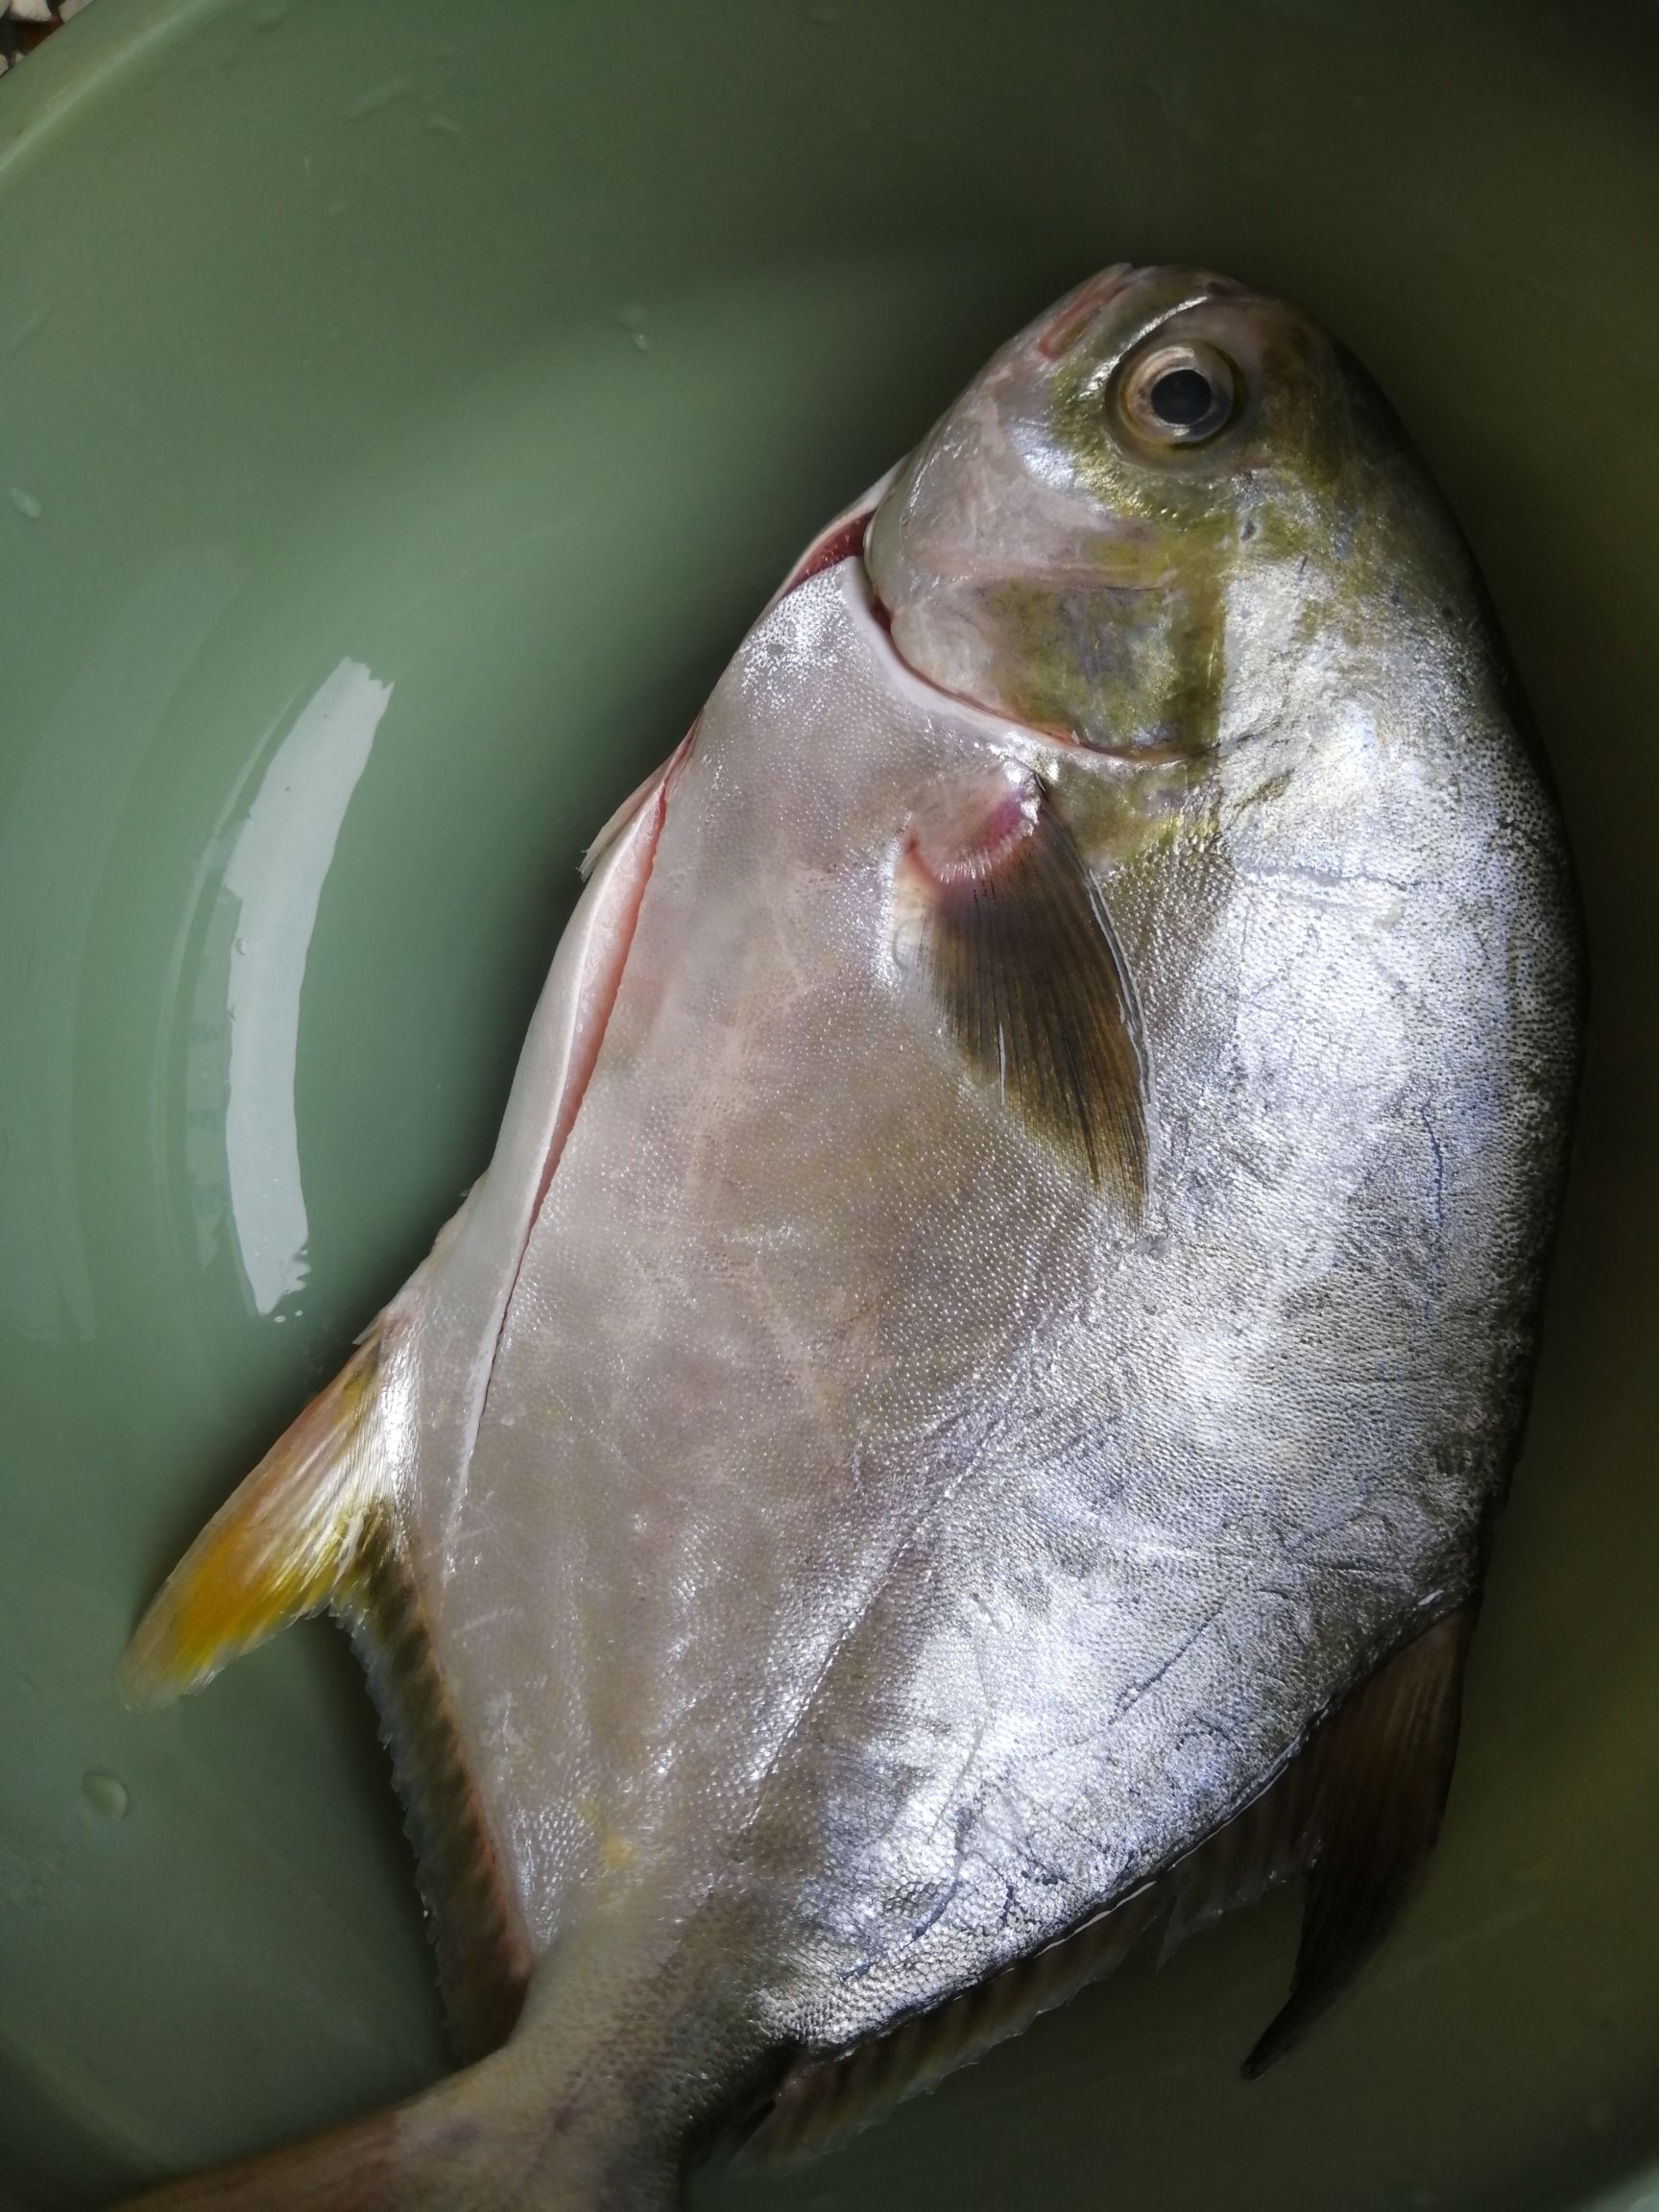 Don't Forget The Soup-home-cooked Pomfret recipe